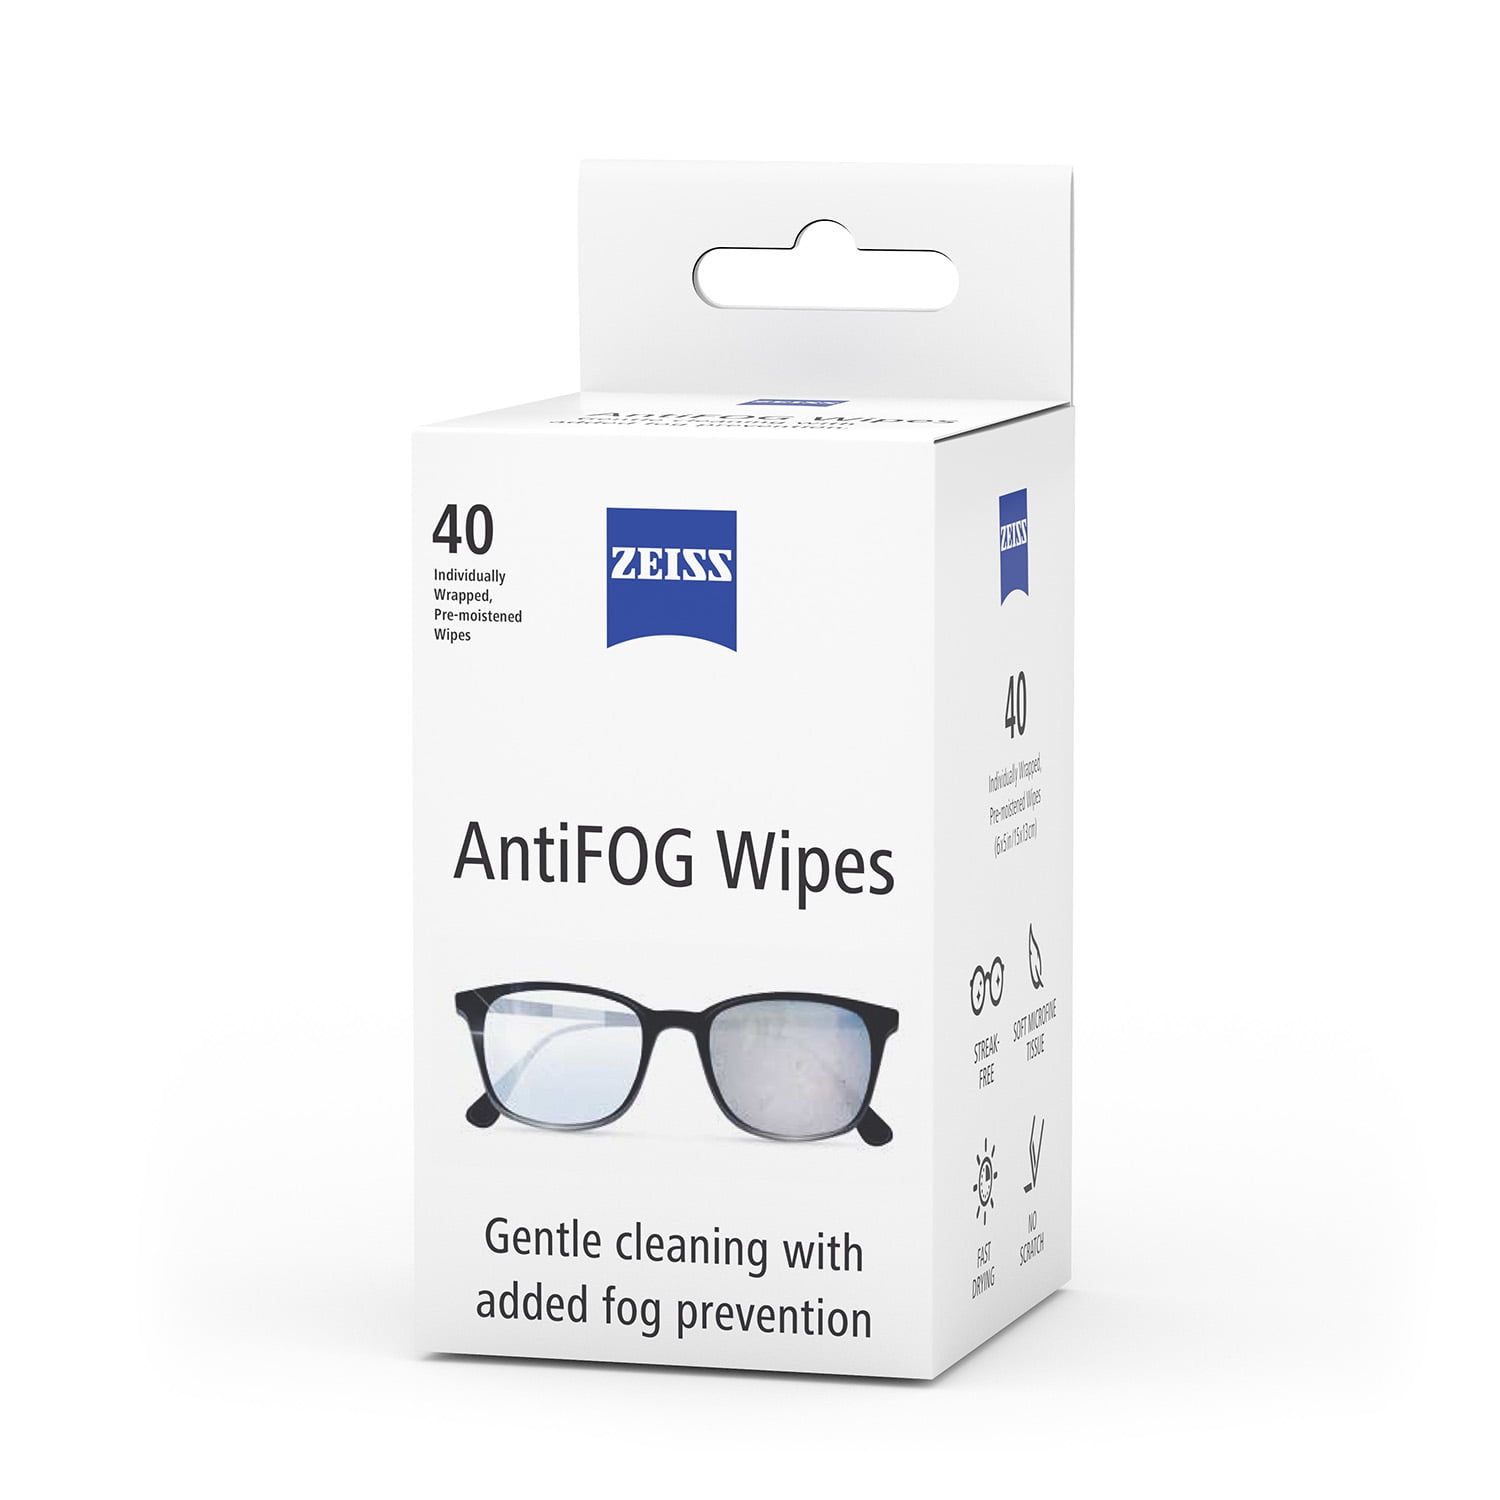 Anti Fog Wipes for Glasses 70 Count Quick Dry Individual Wrapped Pre-Moistened Defogging Screen Wipes with A Carrying Box Suitable for All Types